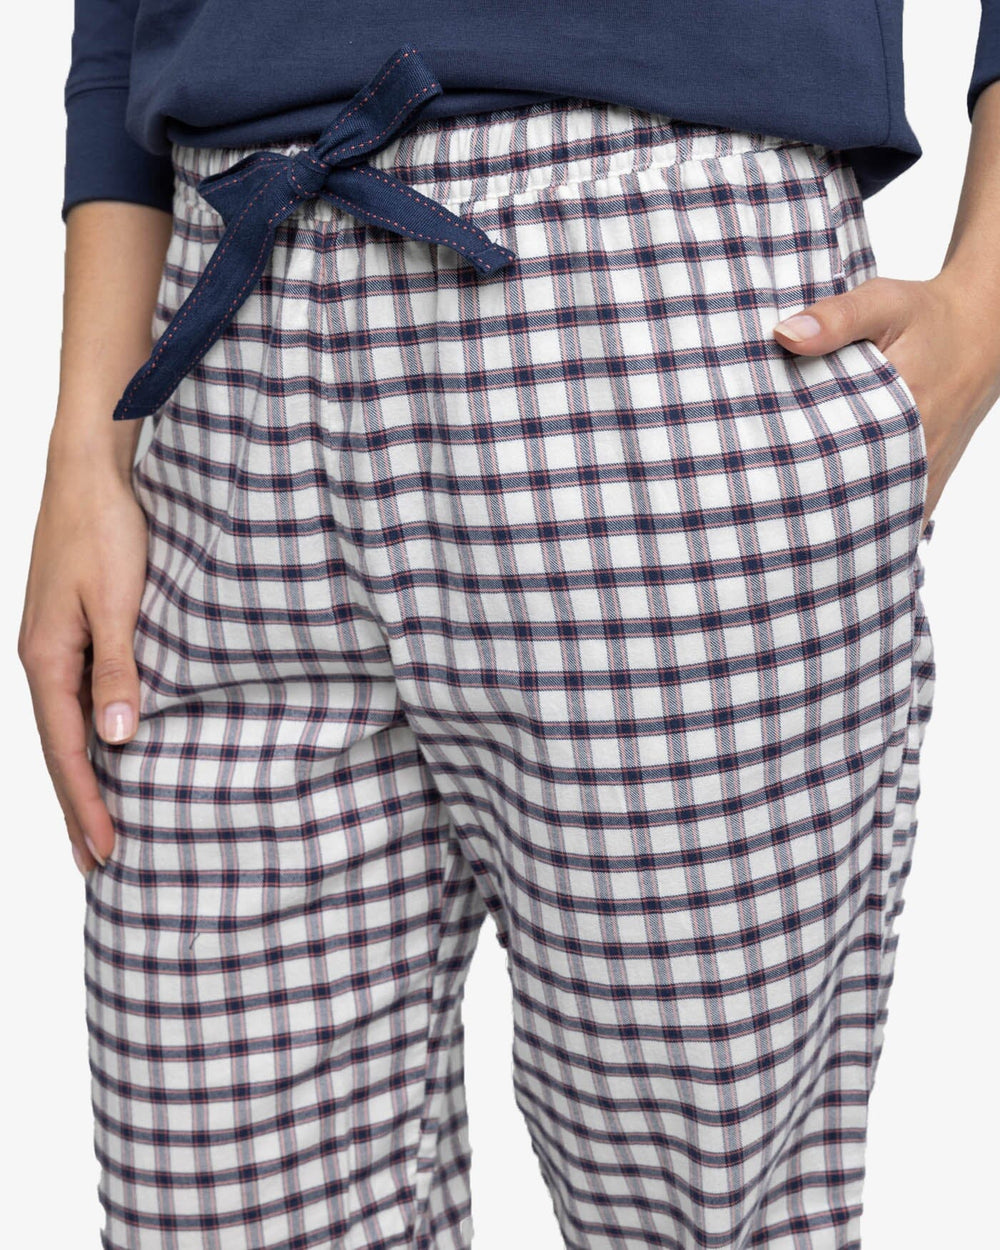 The detail view of the Southern Tide Women's Silverleaf Plaid Lounge Pant by Southern Tide - Marshmallow